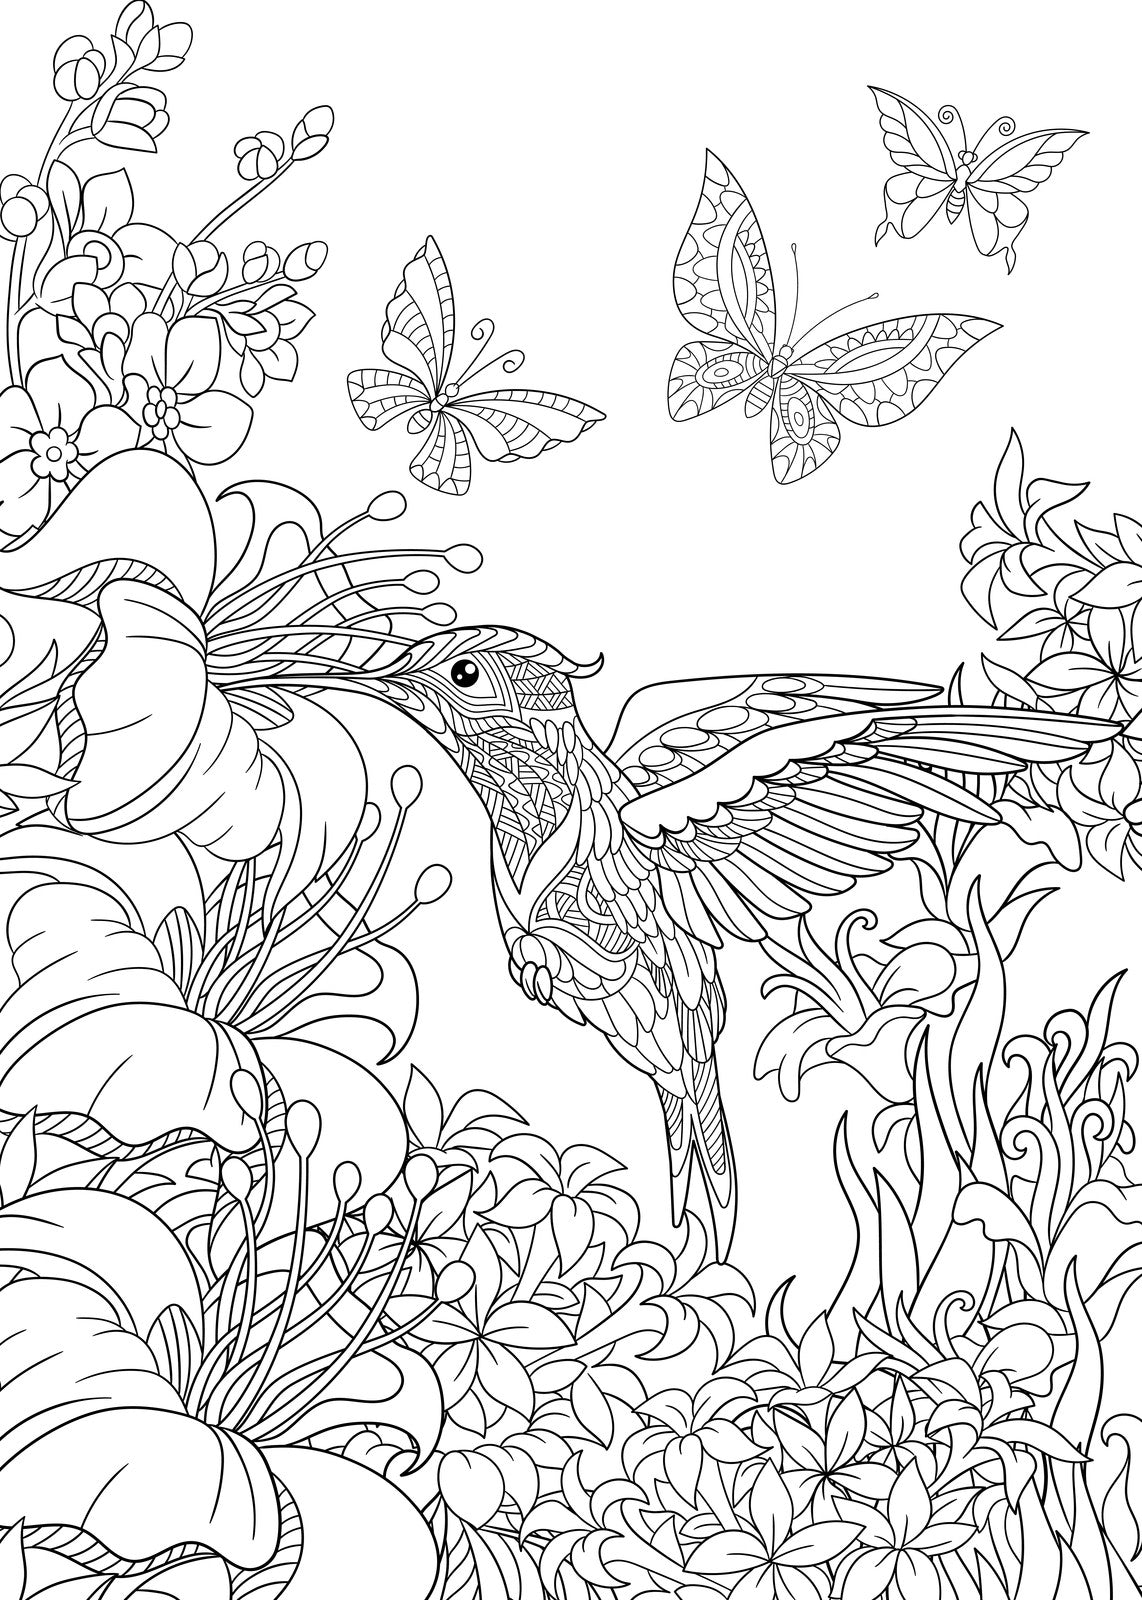 ​ Nectar Hummingbirds - Beautiful Colibri Birds, Flowers and Floral Decorated Pages - PDF Format Coloring Book